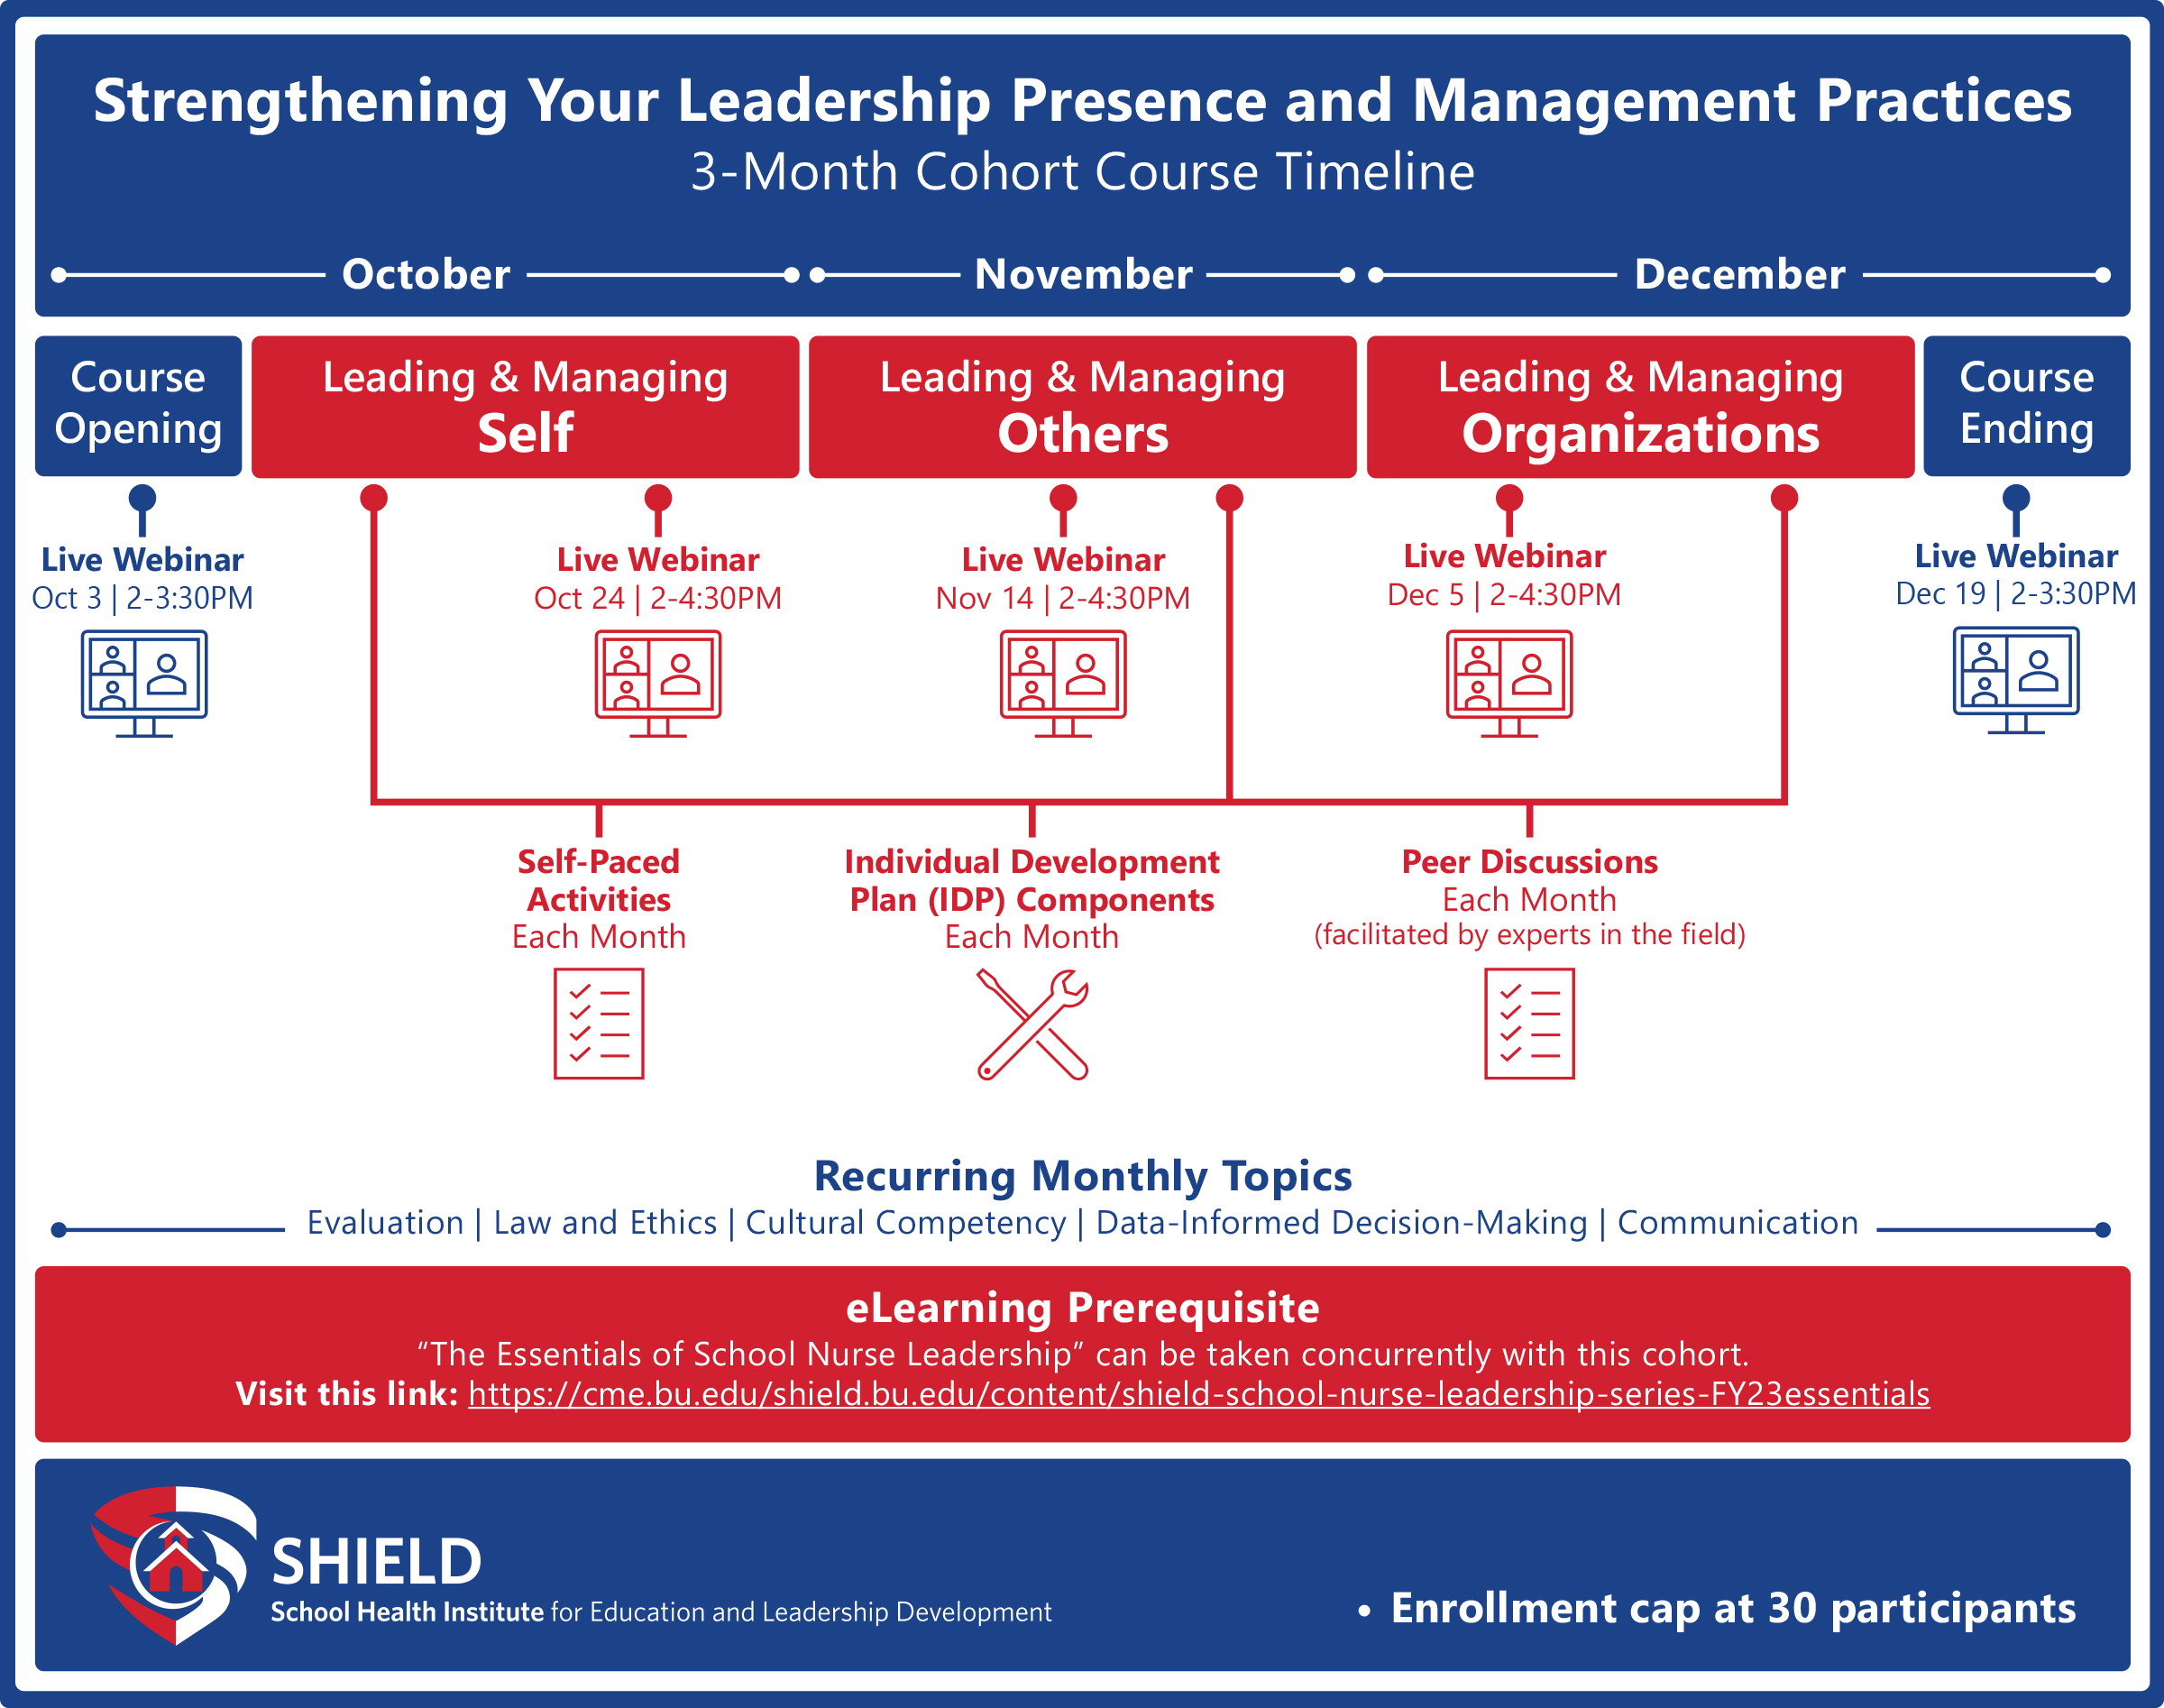 Leadership Cohort Timeline. Live webinars, self-paced activities, IDP Components and Peer Discussions. 